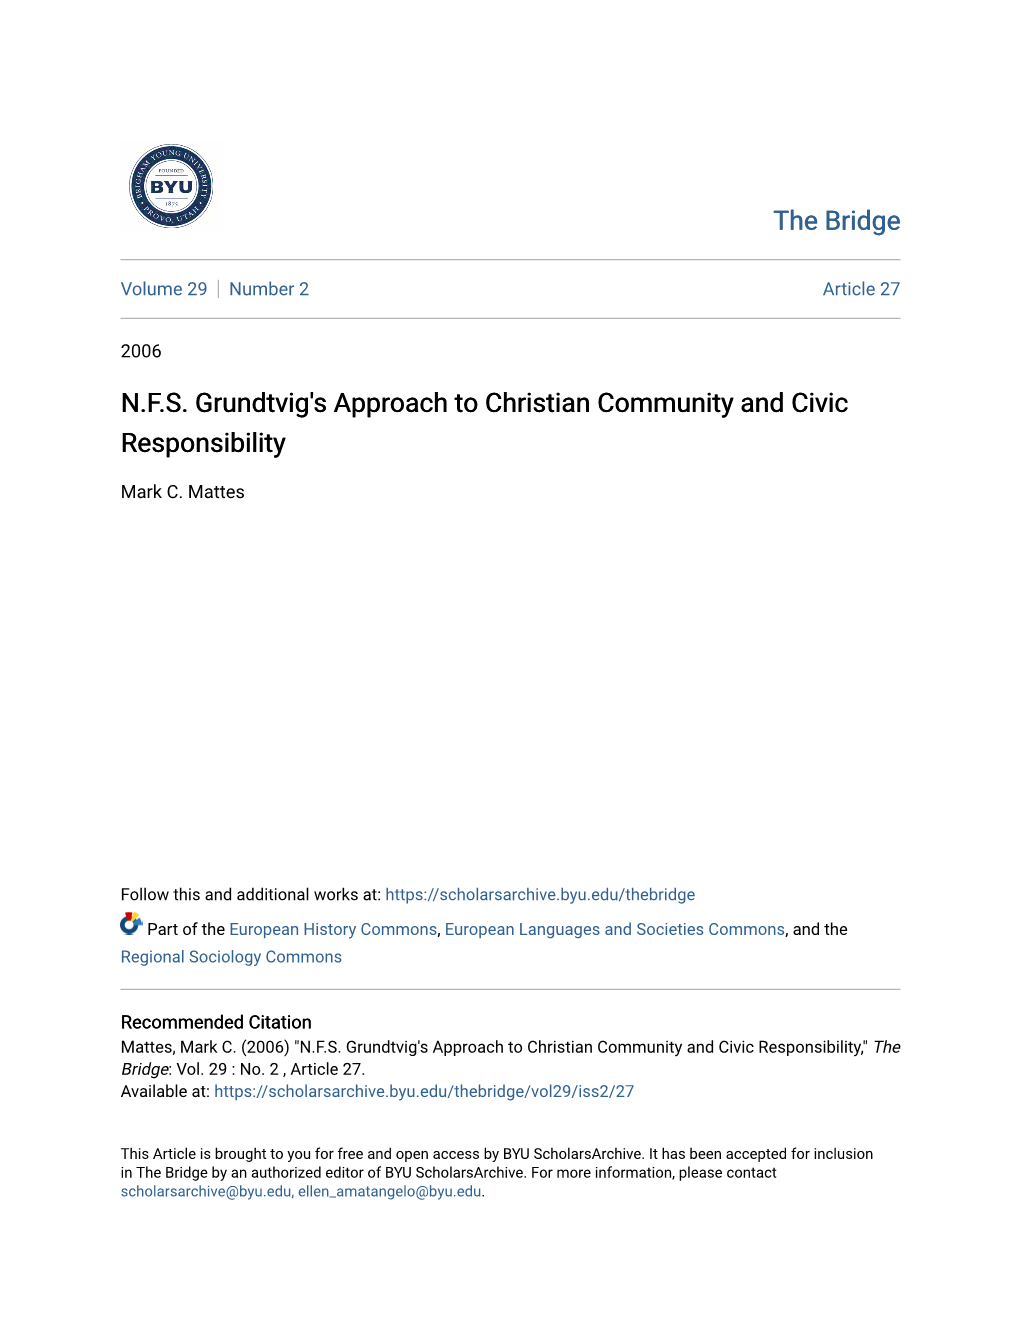 N.F.S. Grundtvig's Approach to Christian Community and Civic Responsibility